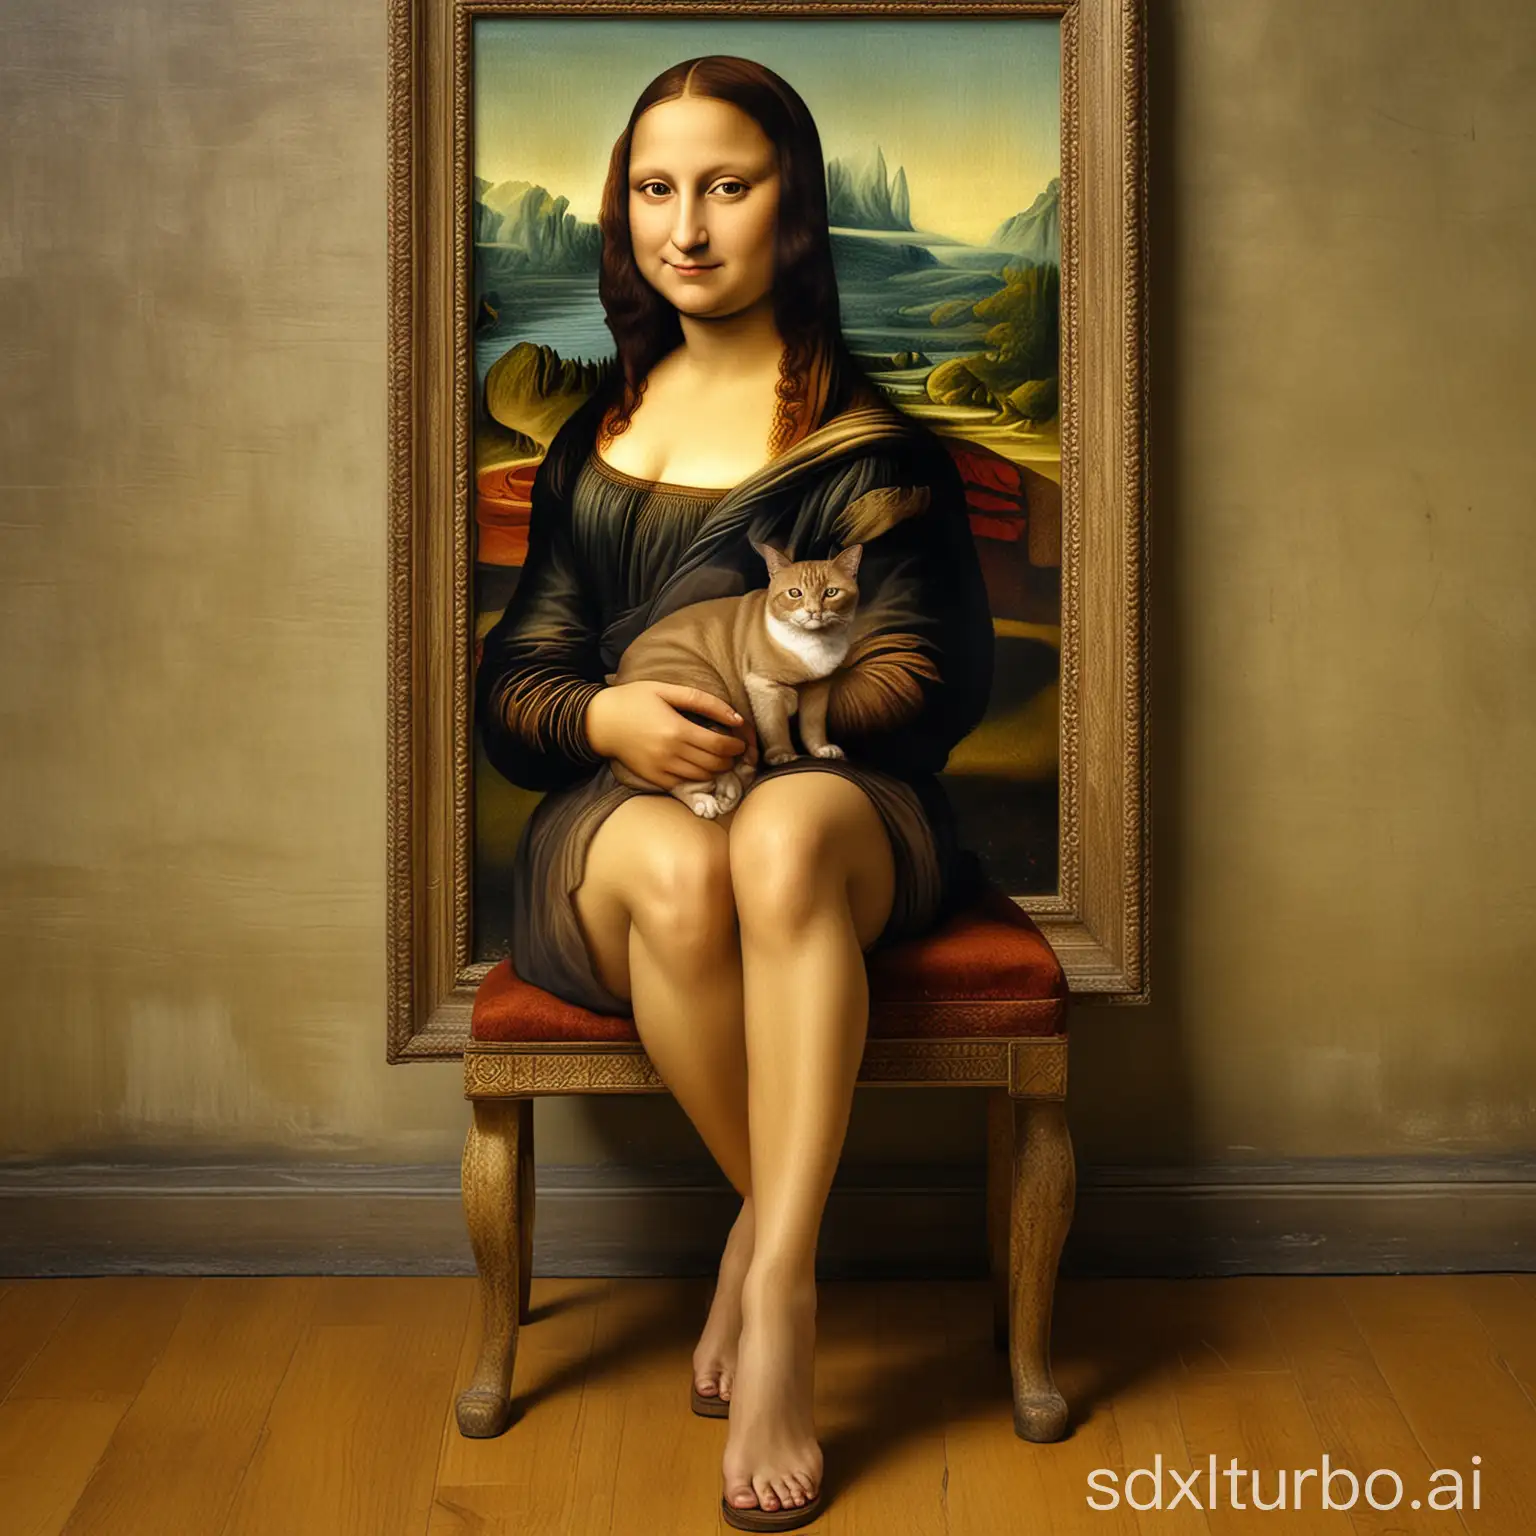 Mona-Lisa-with-Legs-Reimagining-the-Iconic-Portrait-with-an-Unexpected-Twist